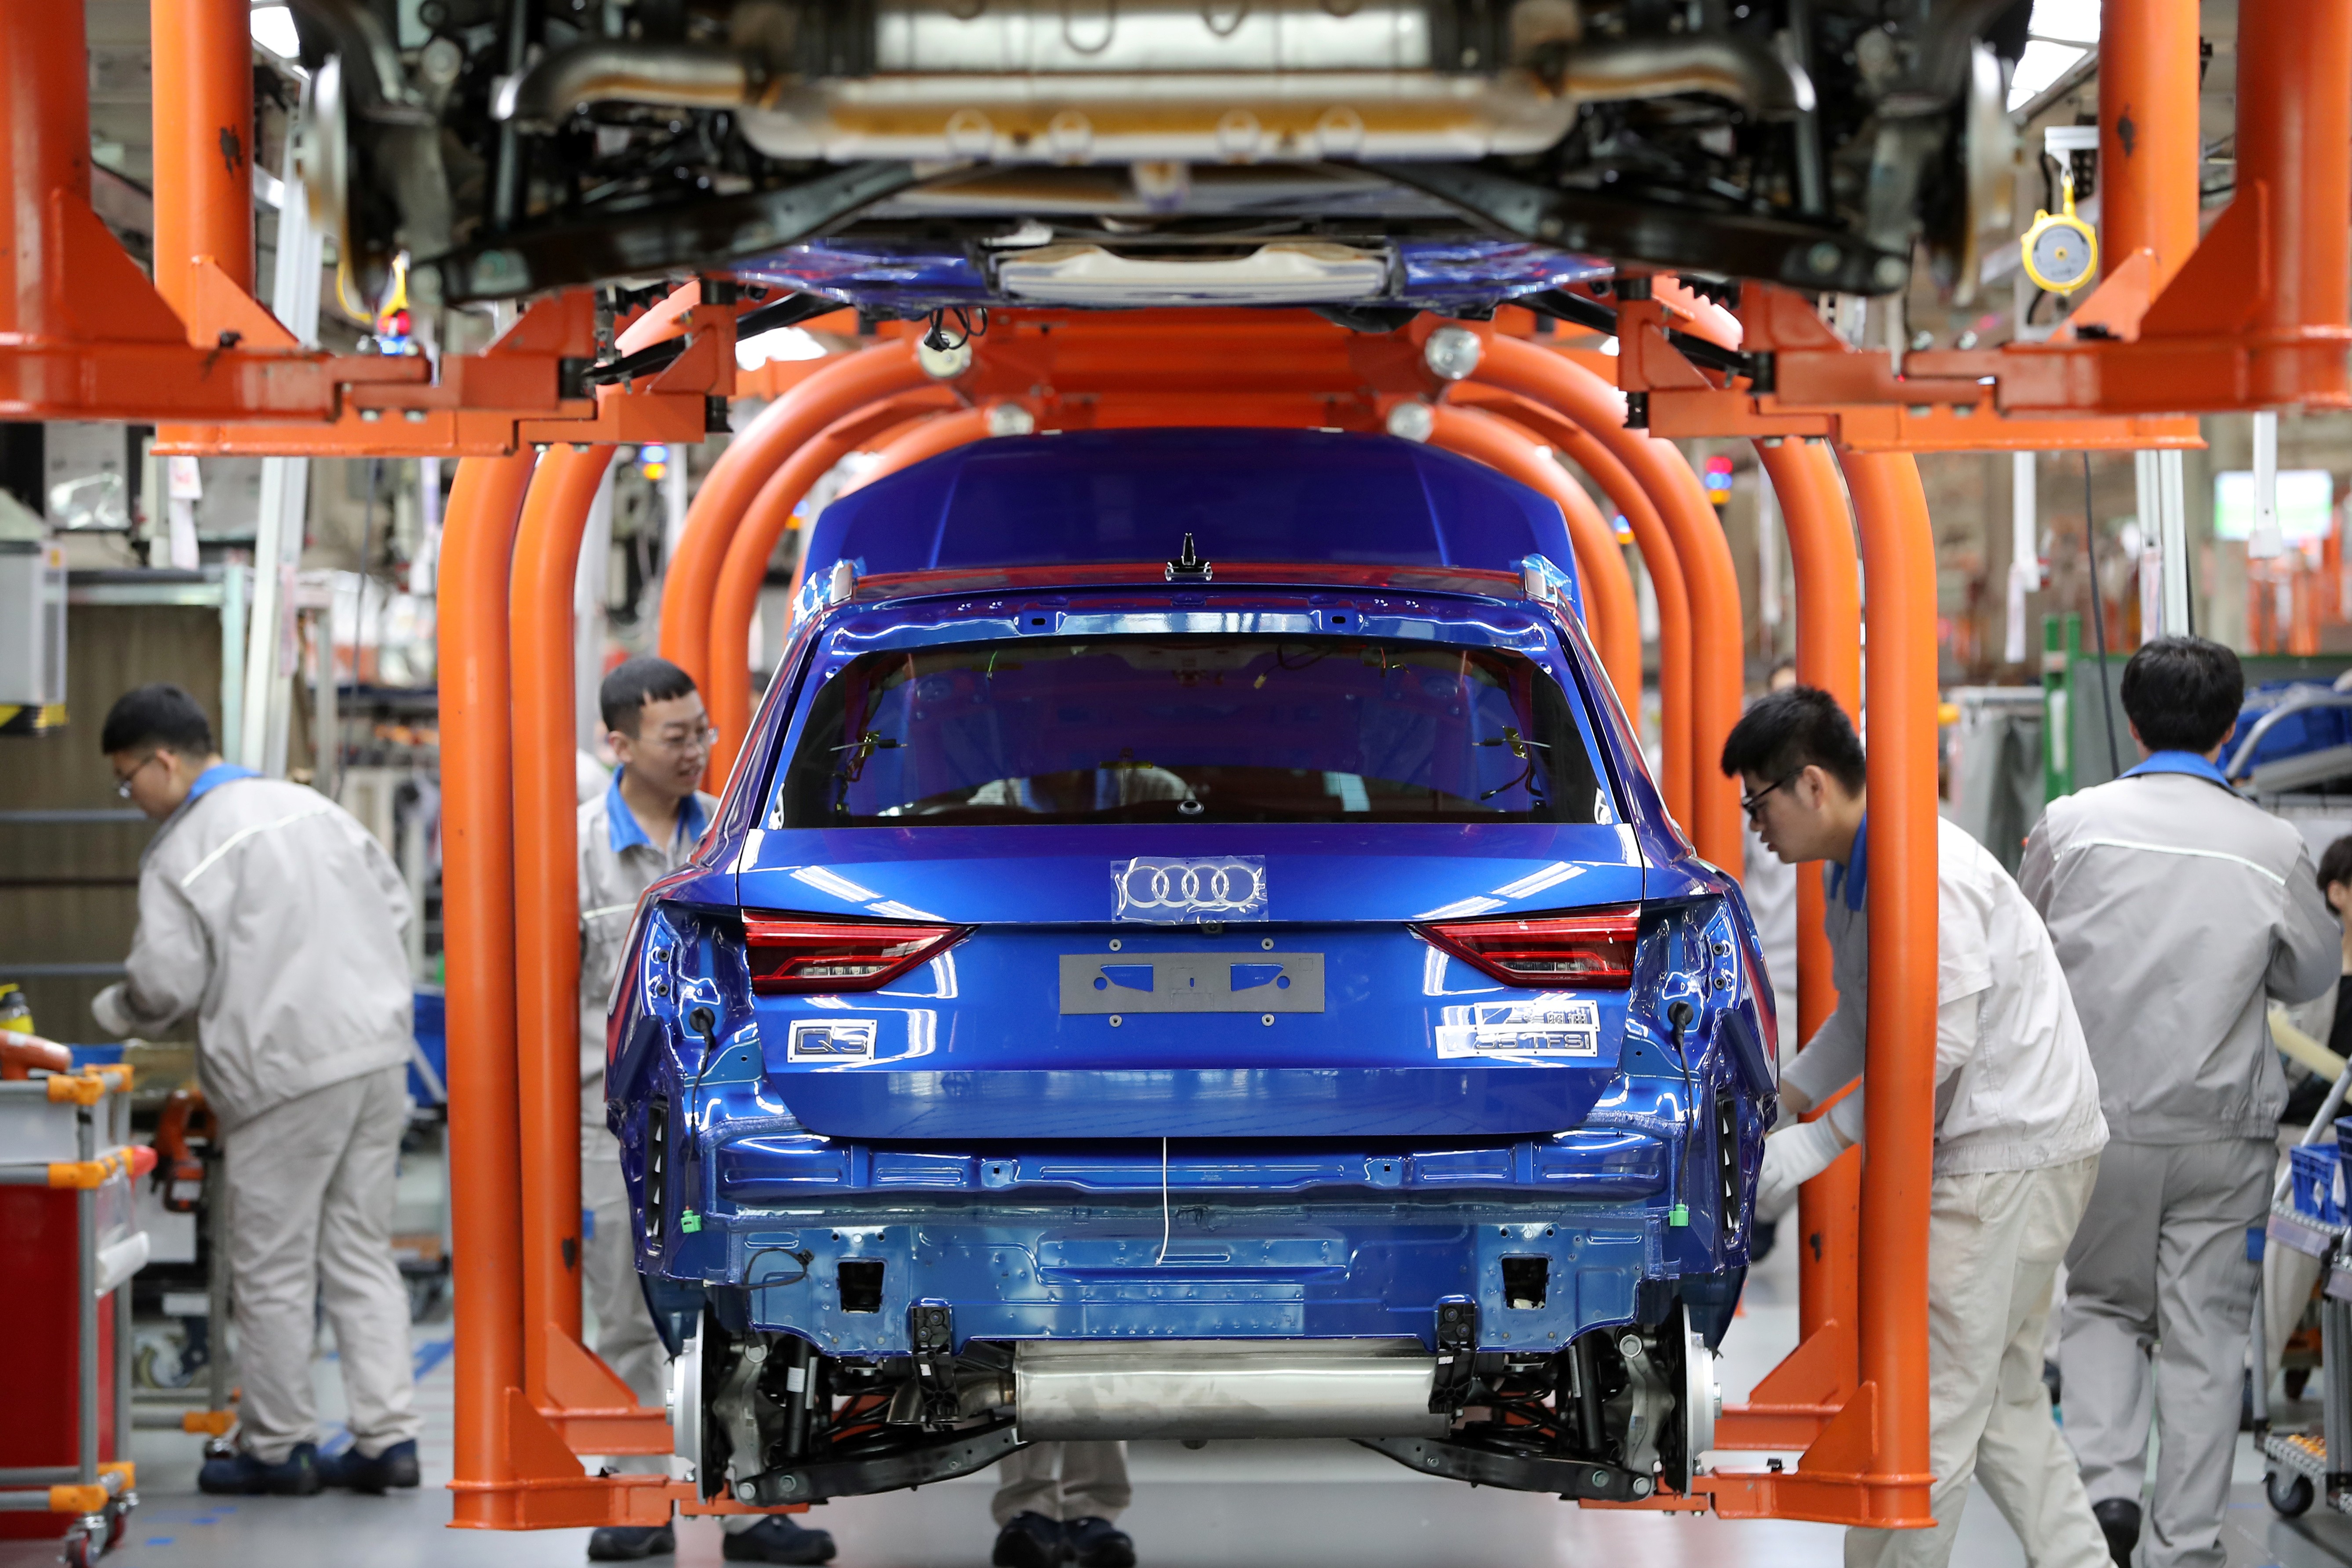 Workers on an assembly line for Audi Q3 cars at the FAW-Volkswagen Tianjin plant in Tianjin, China, on December 5, 2019. Photo: Reuters